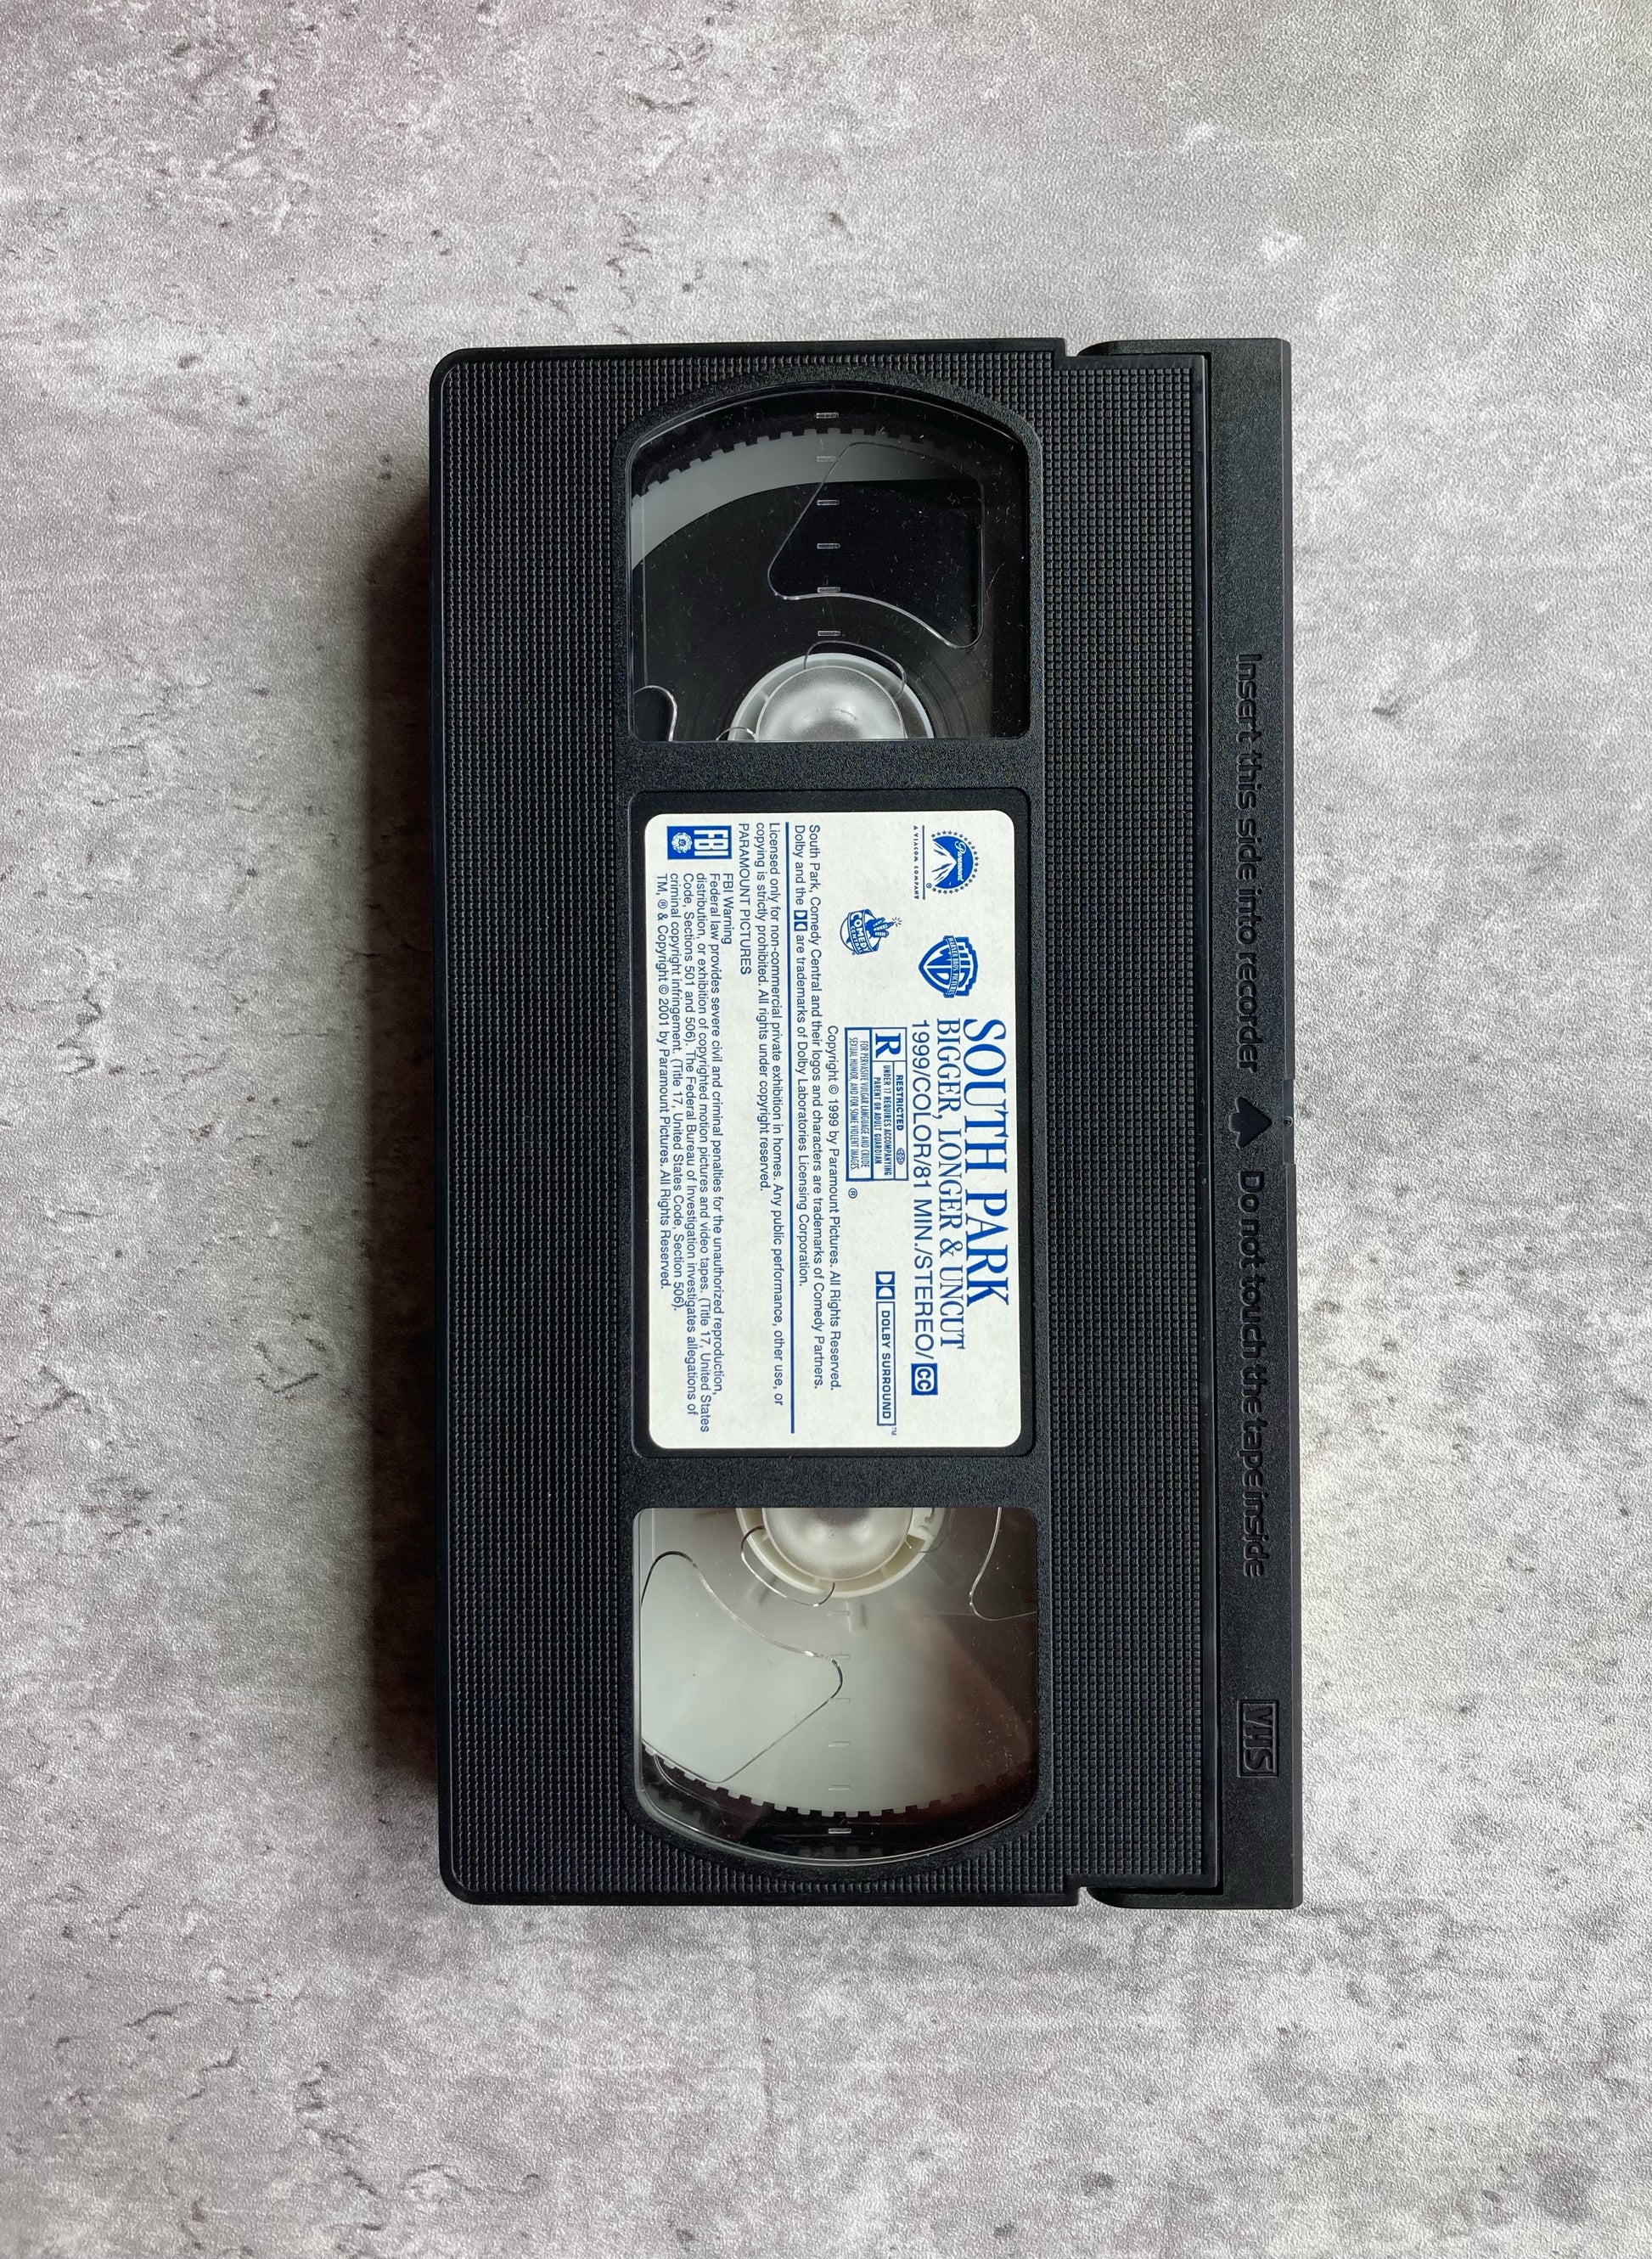 VHS of the South Park Movie. Shop for VHS and books with The Stone Circle, the only online bookstore near you.